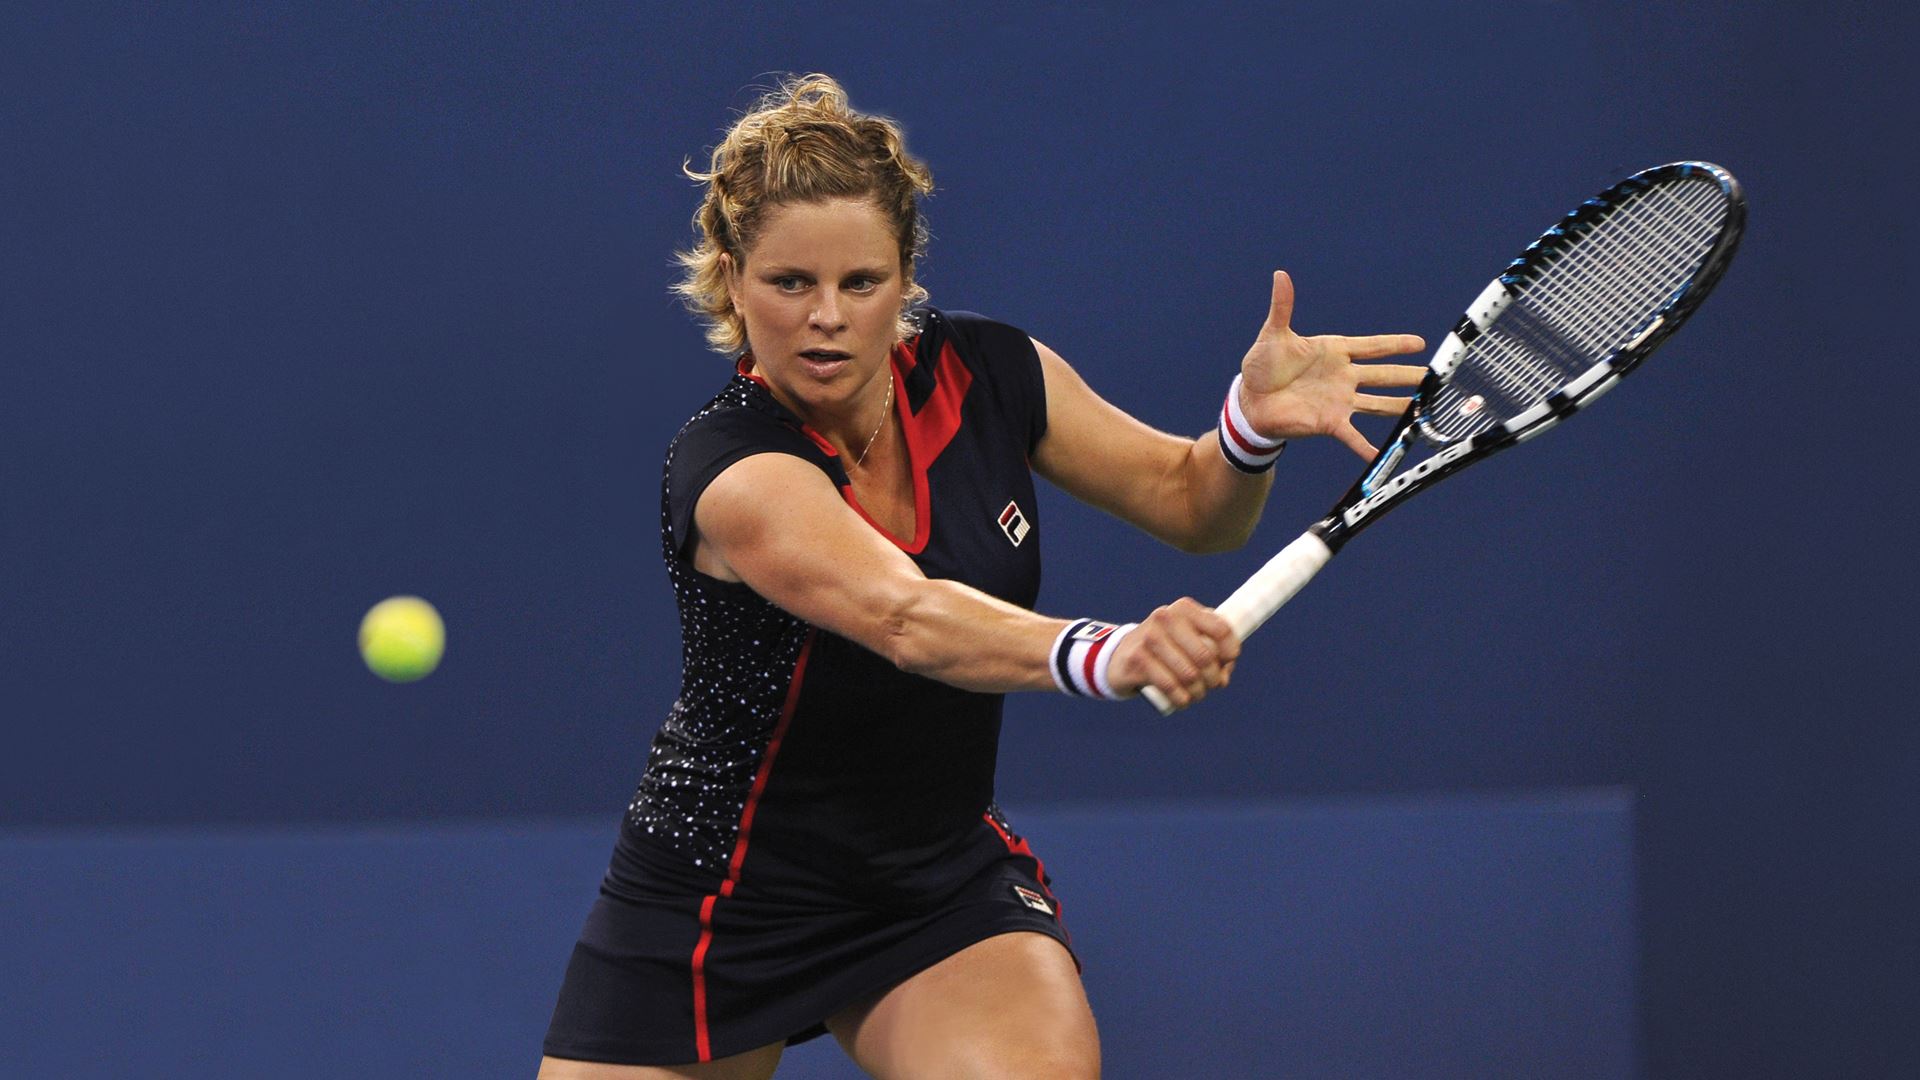 FILA and International Tennis Hall of Fame Launch Commemorative Kim Clijsters Collection